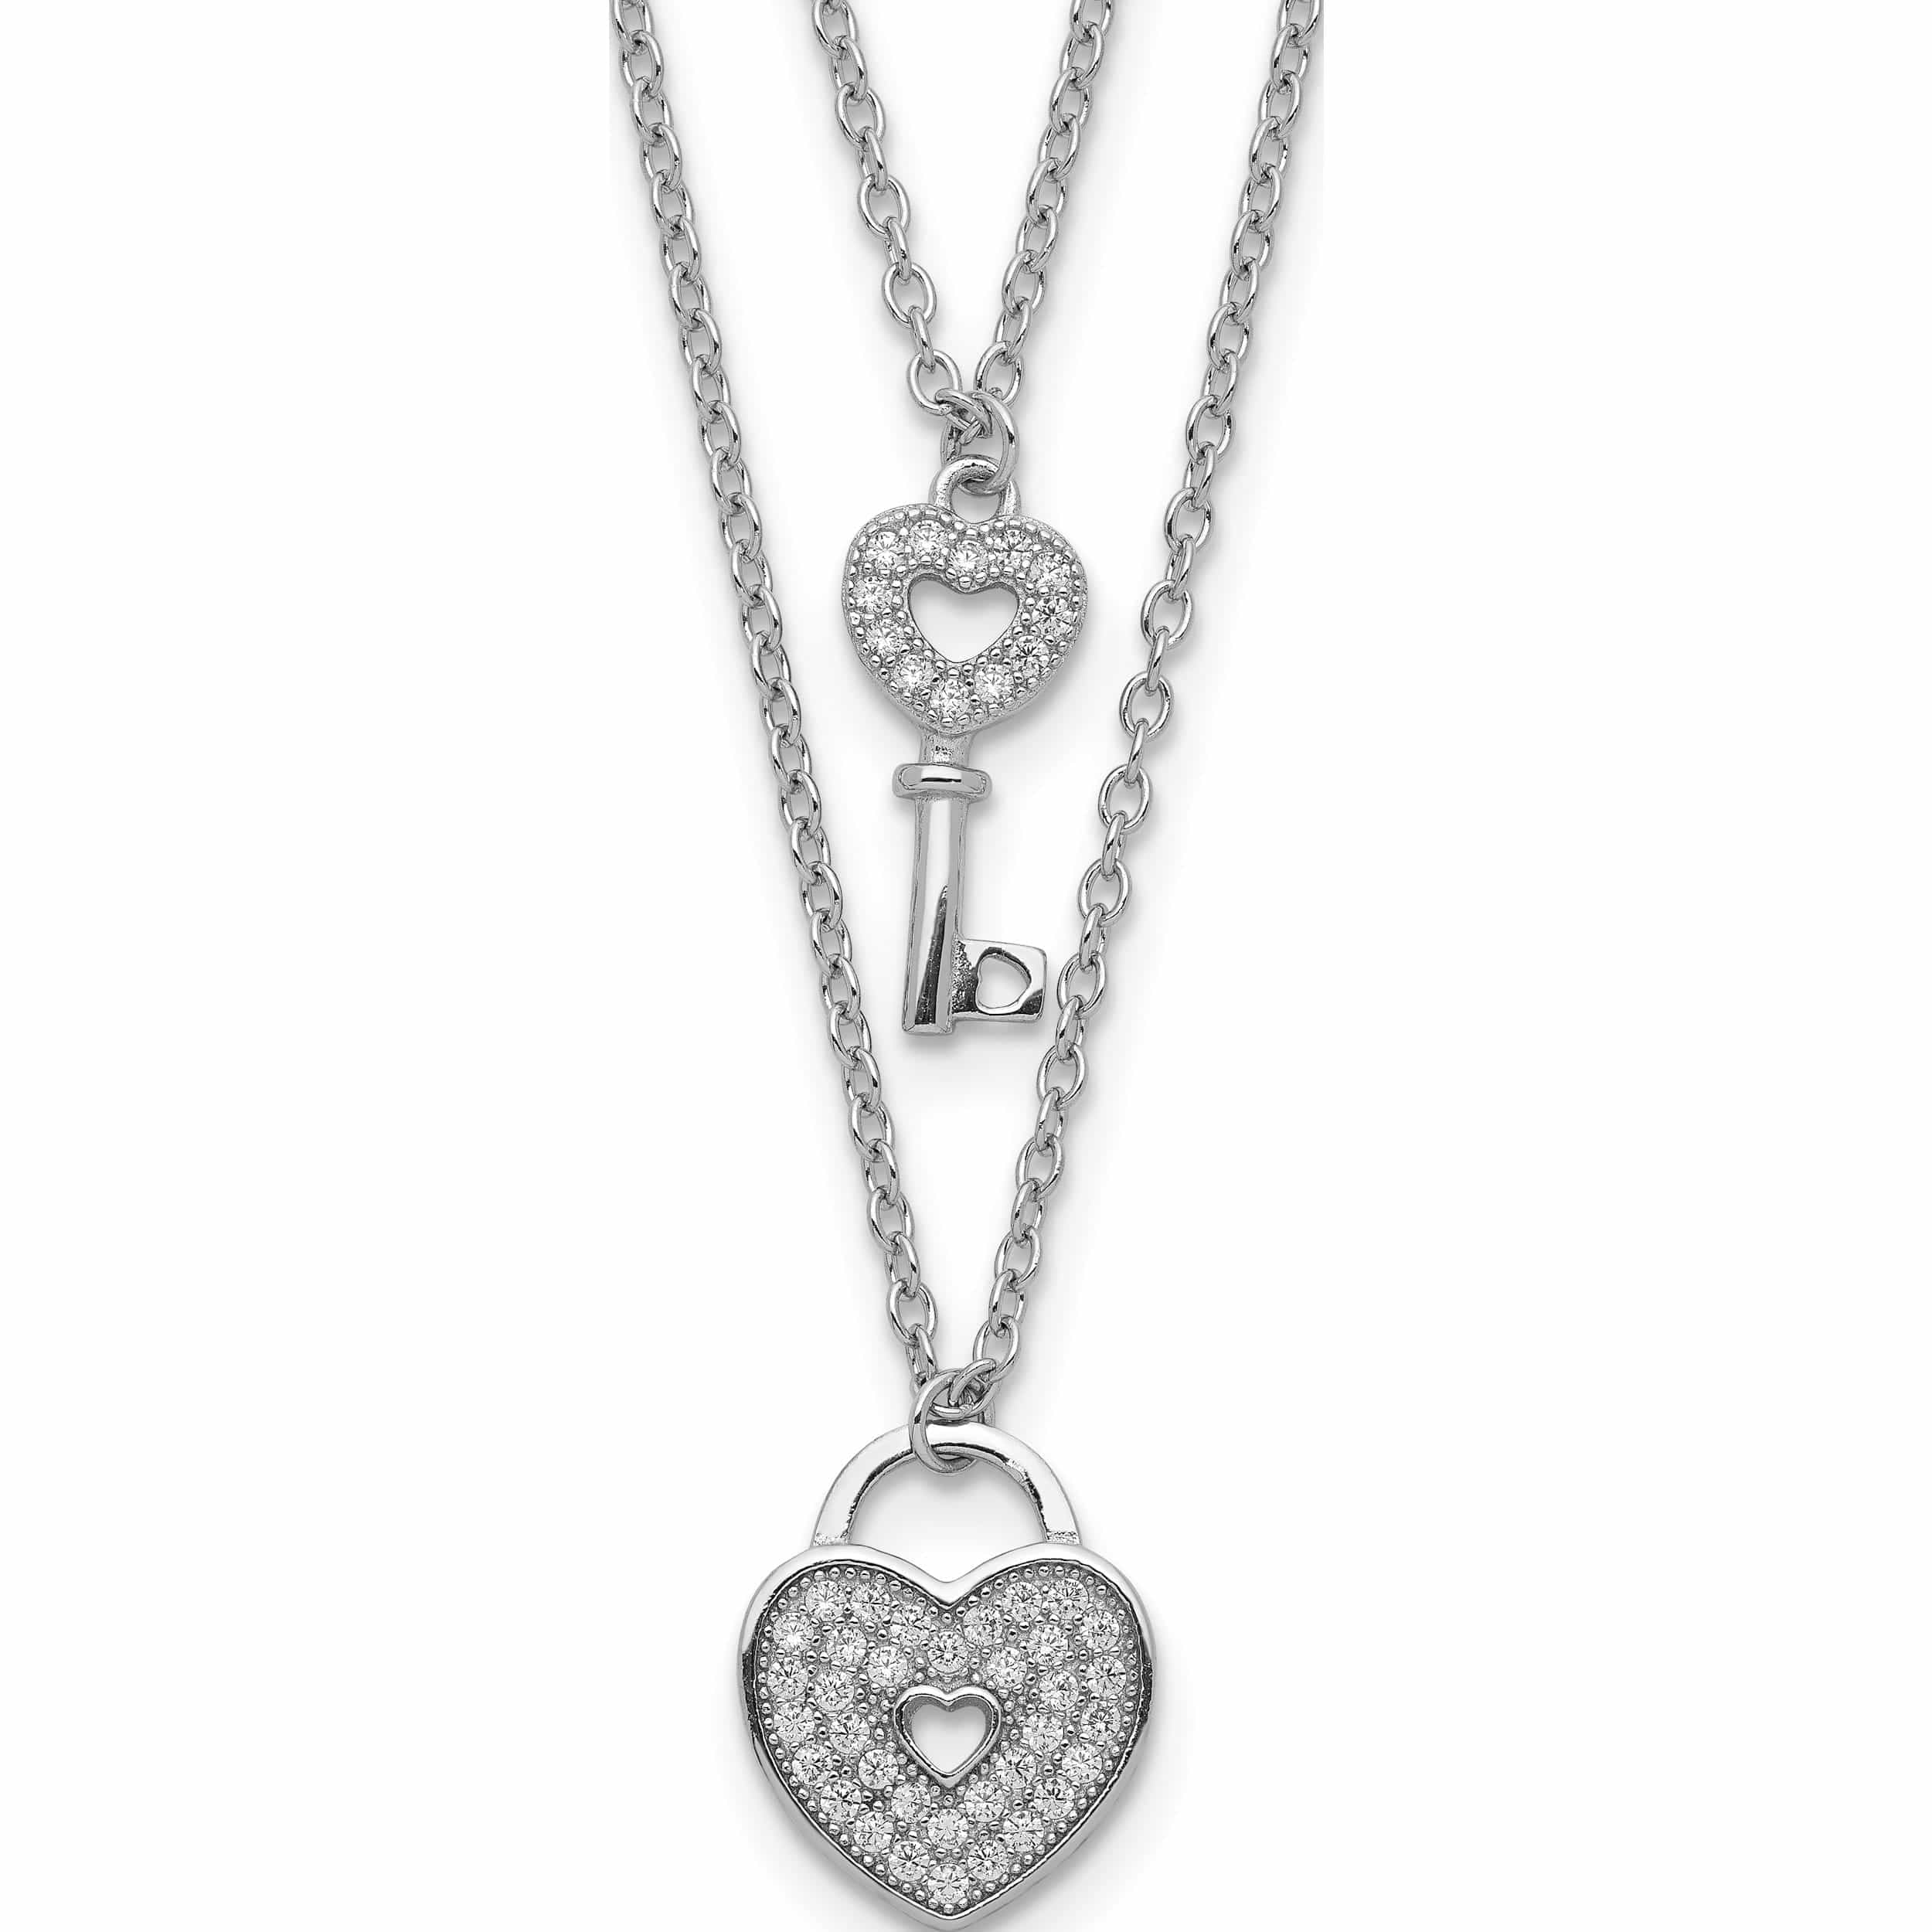 Necklace 925 Sterling Silver Rhodium-plated Open Heart and Key with 2in ext 16 Length 